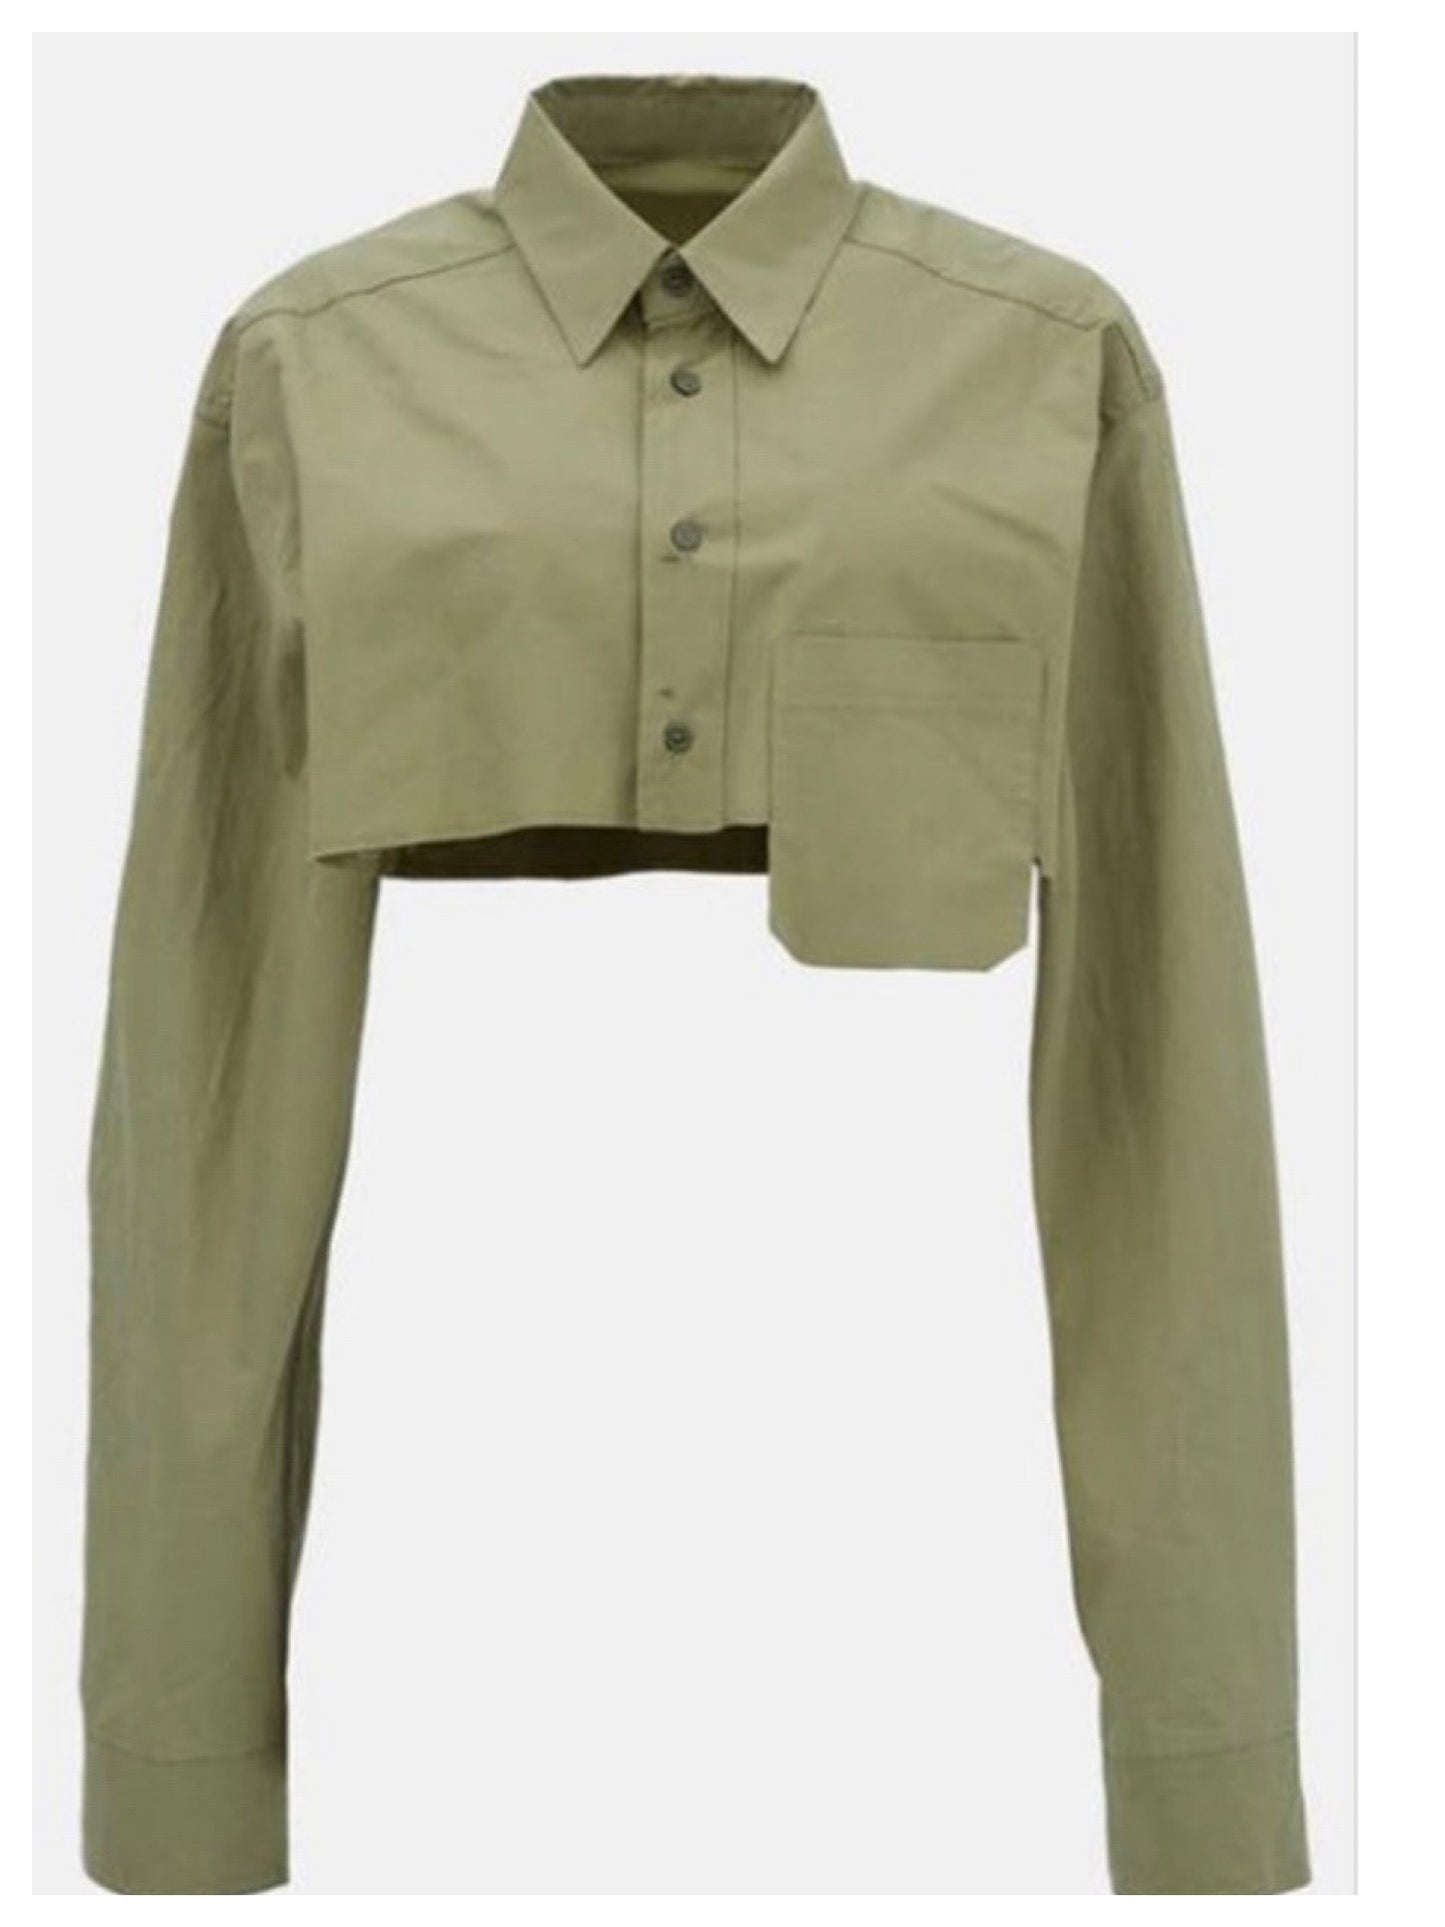 Maxed out Too Crop Long Sleeve Top (Olive)